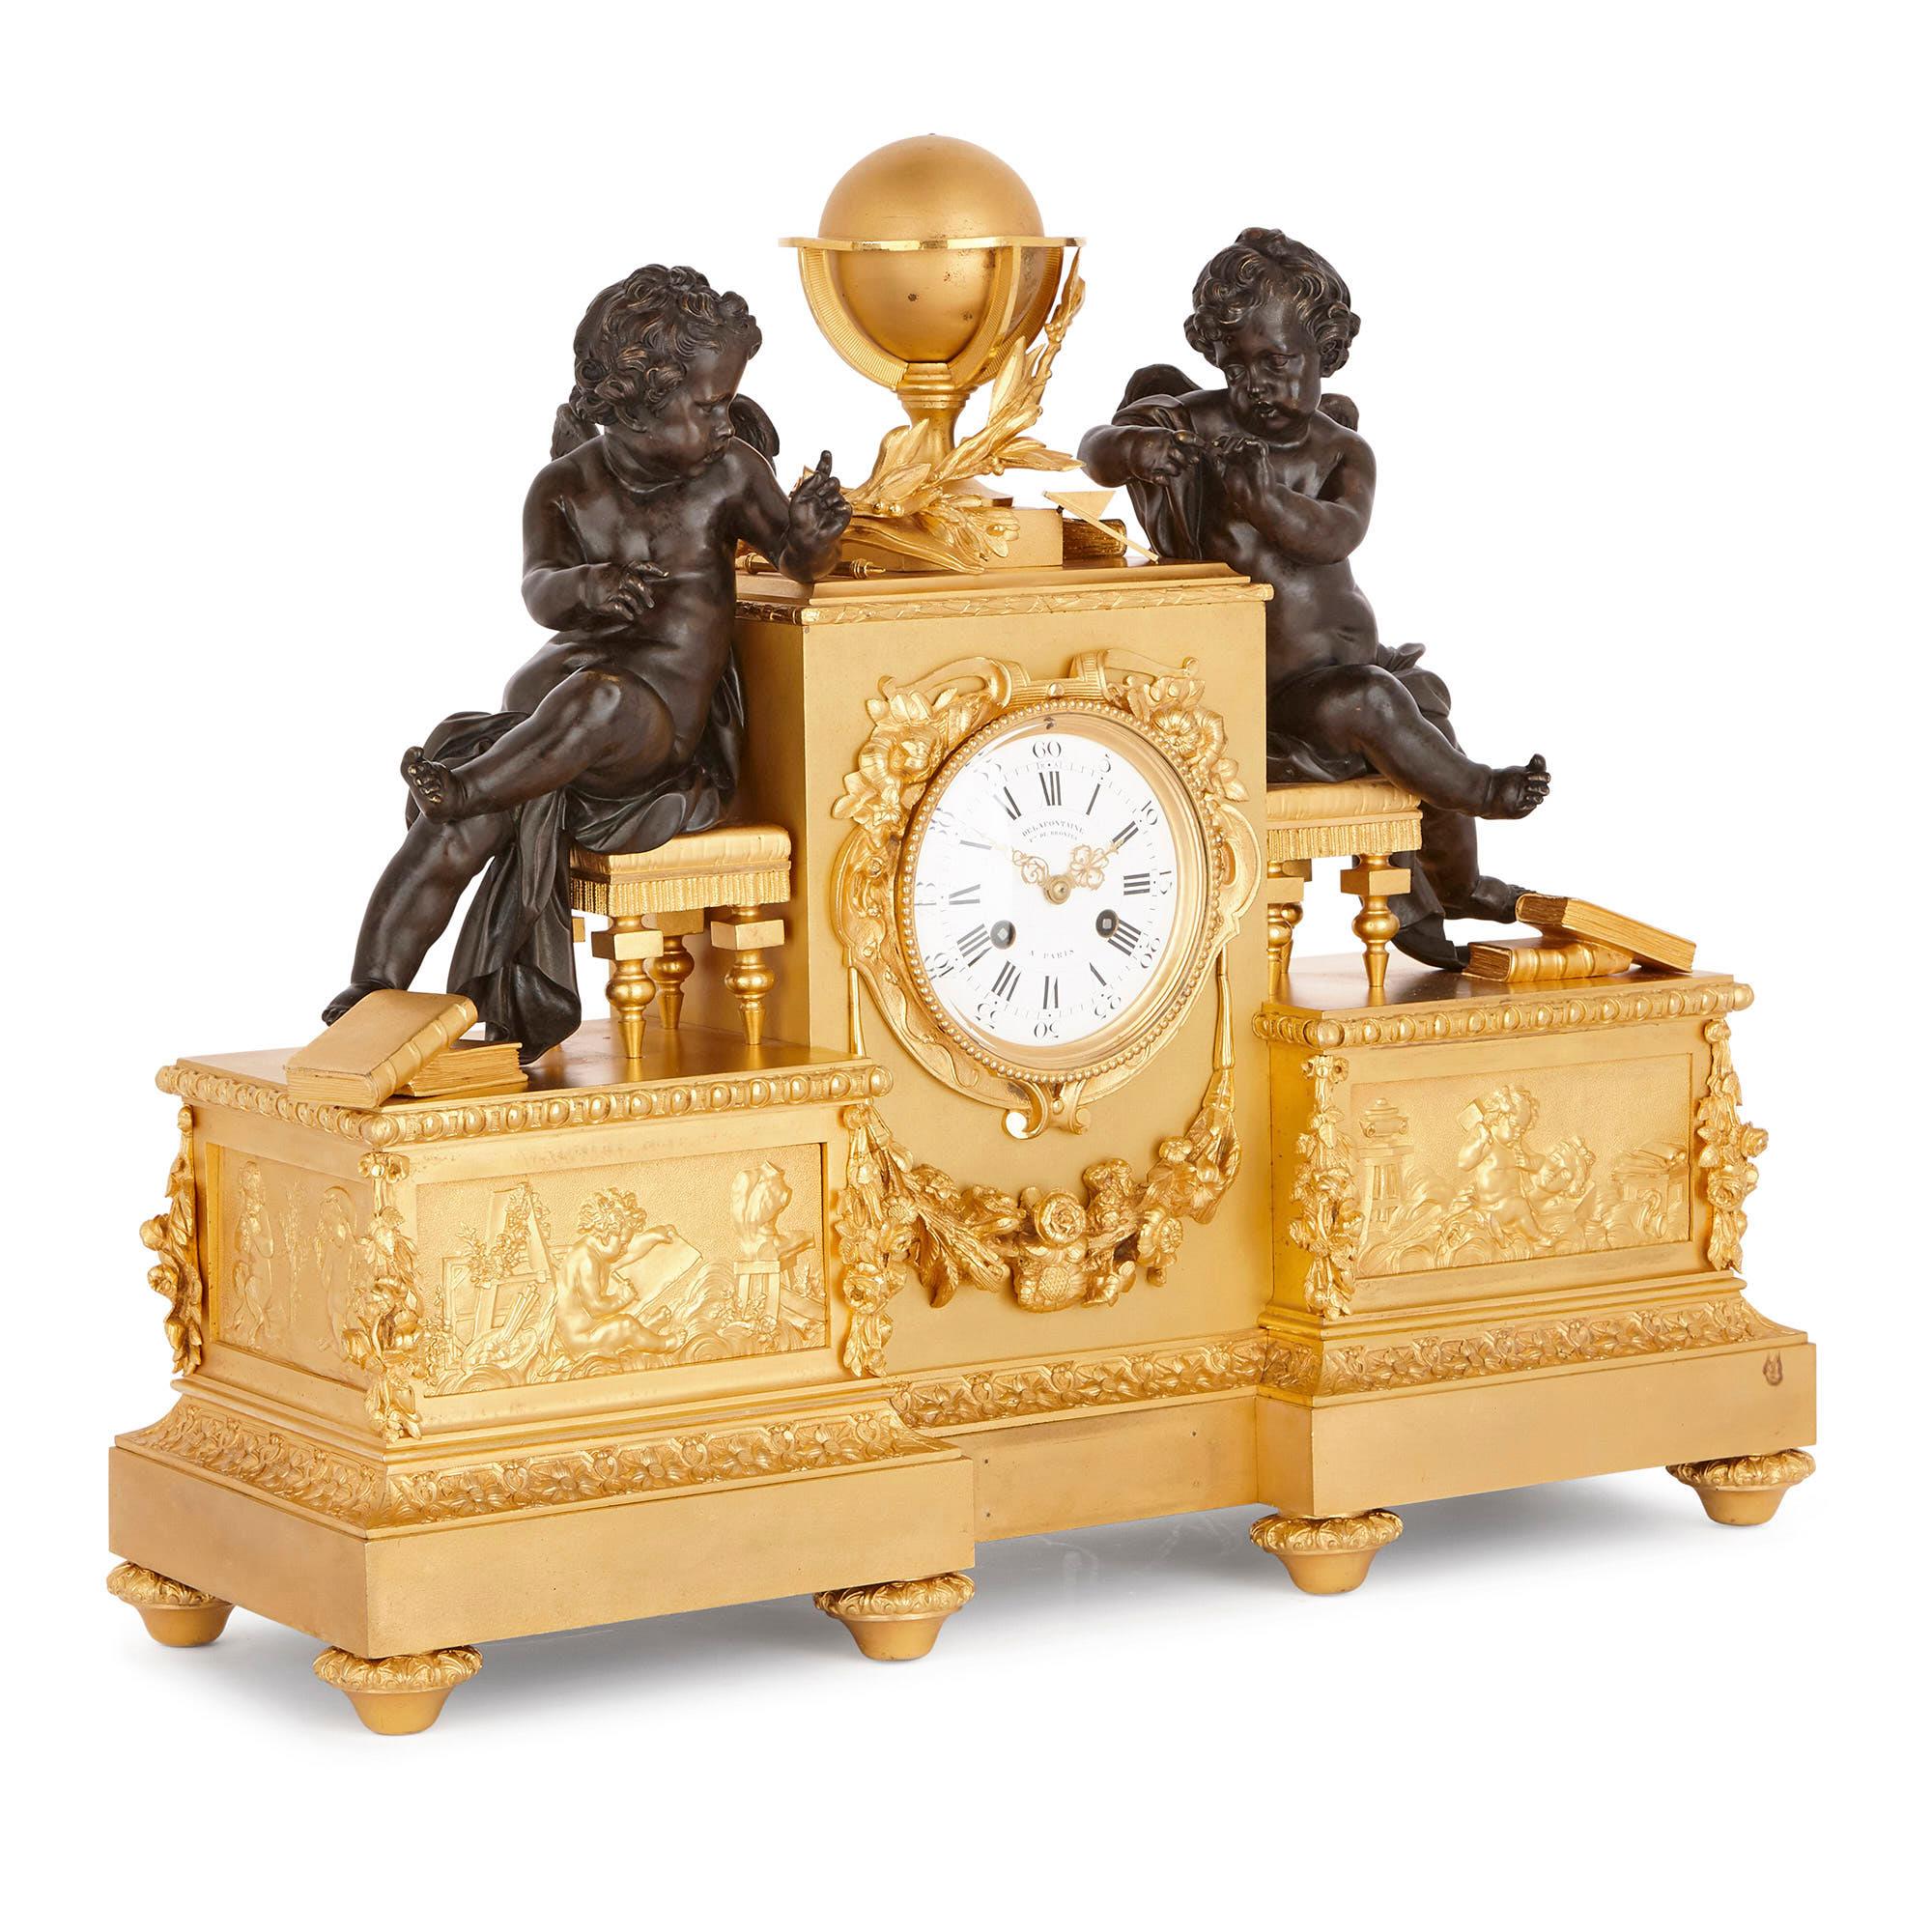 The acclaimed French bronze foundry, Delafontaine, created this remarkable mantel clock. At the time this piece was crafted, in c.1860, the company was directed by Auguste-Maximilien Delafontaine (1813-1892). The firm was famous for its high-quality